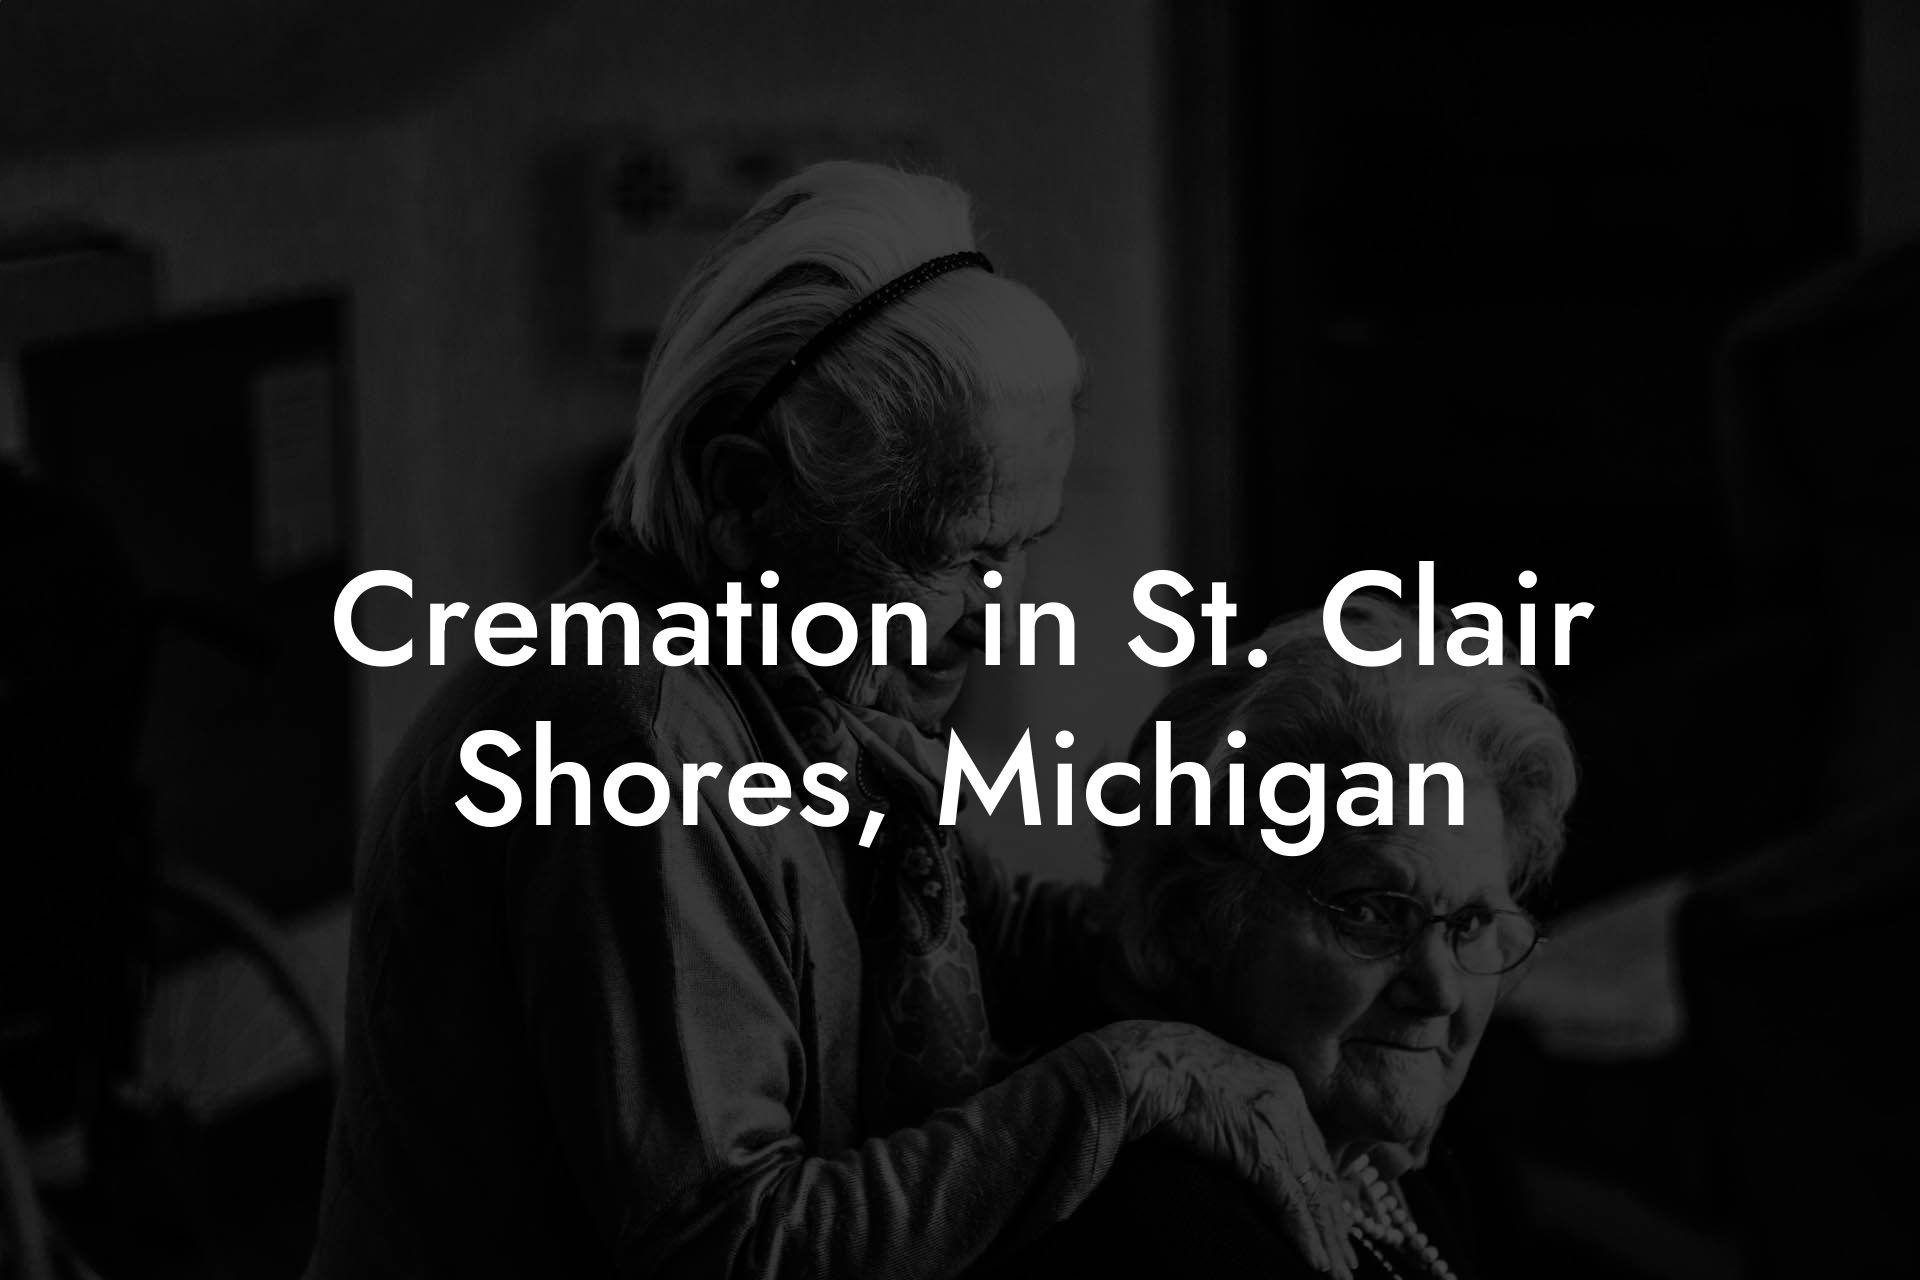 Cremation in St. Clair Shores, Michigan